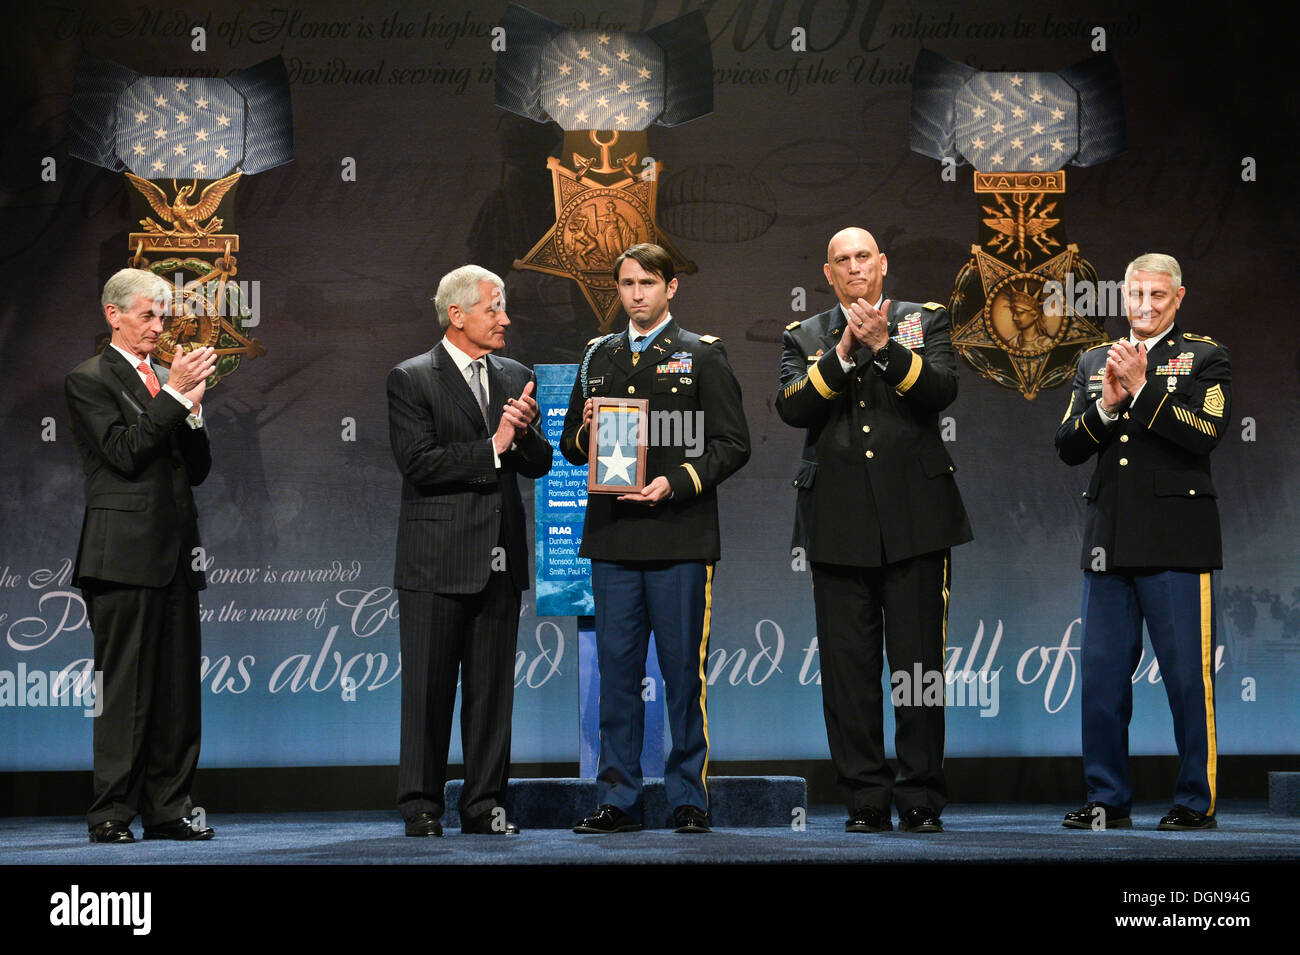 From left to right, Secretary of Defense Chuck Hagel, Secretary of the Army John McHugh, Former U.S. Army Capt. William D. Swenson, Chief of Staff of the Army Gen. Raymond T. Odierno, Sgt. Maj. of the Army Raymond F. Chandler III with the Medal of Honor f Stock Photo